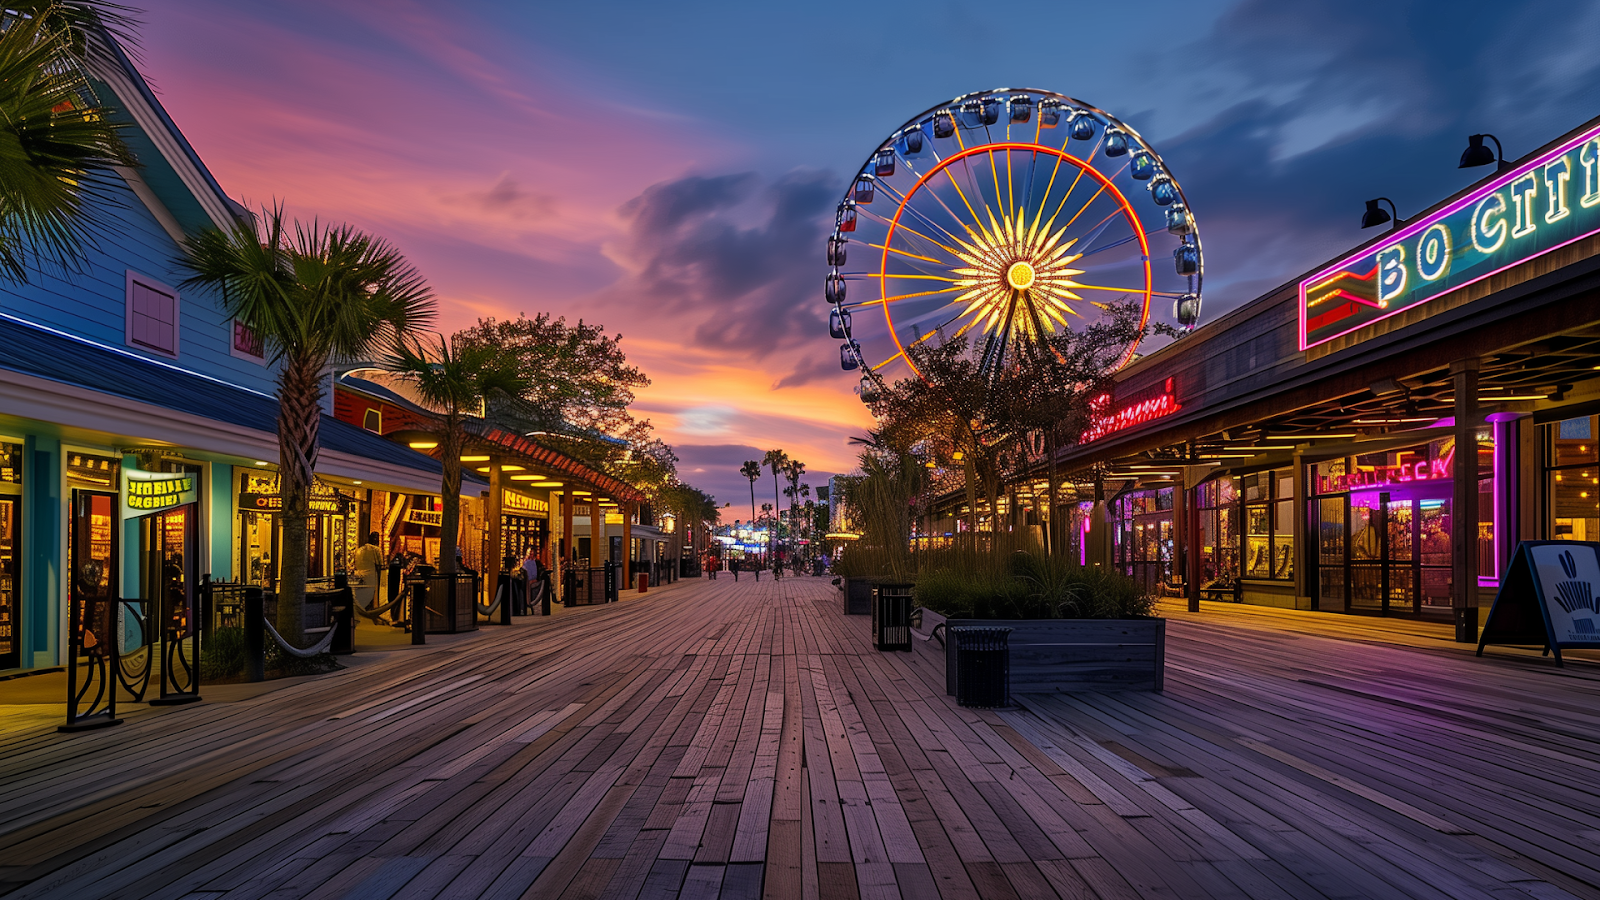 Evening life on Myrtle Beach boardwalk with the SkyWheel illuminating the background.